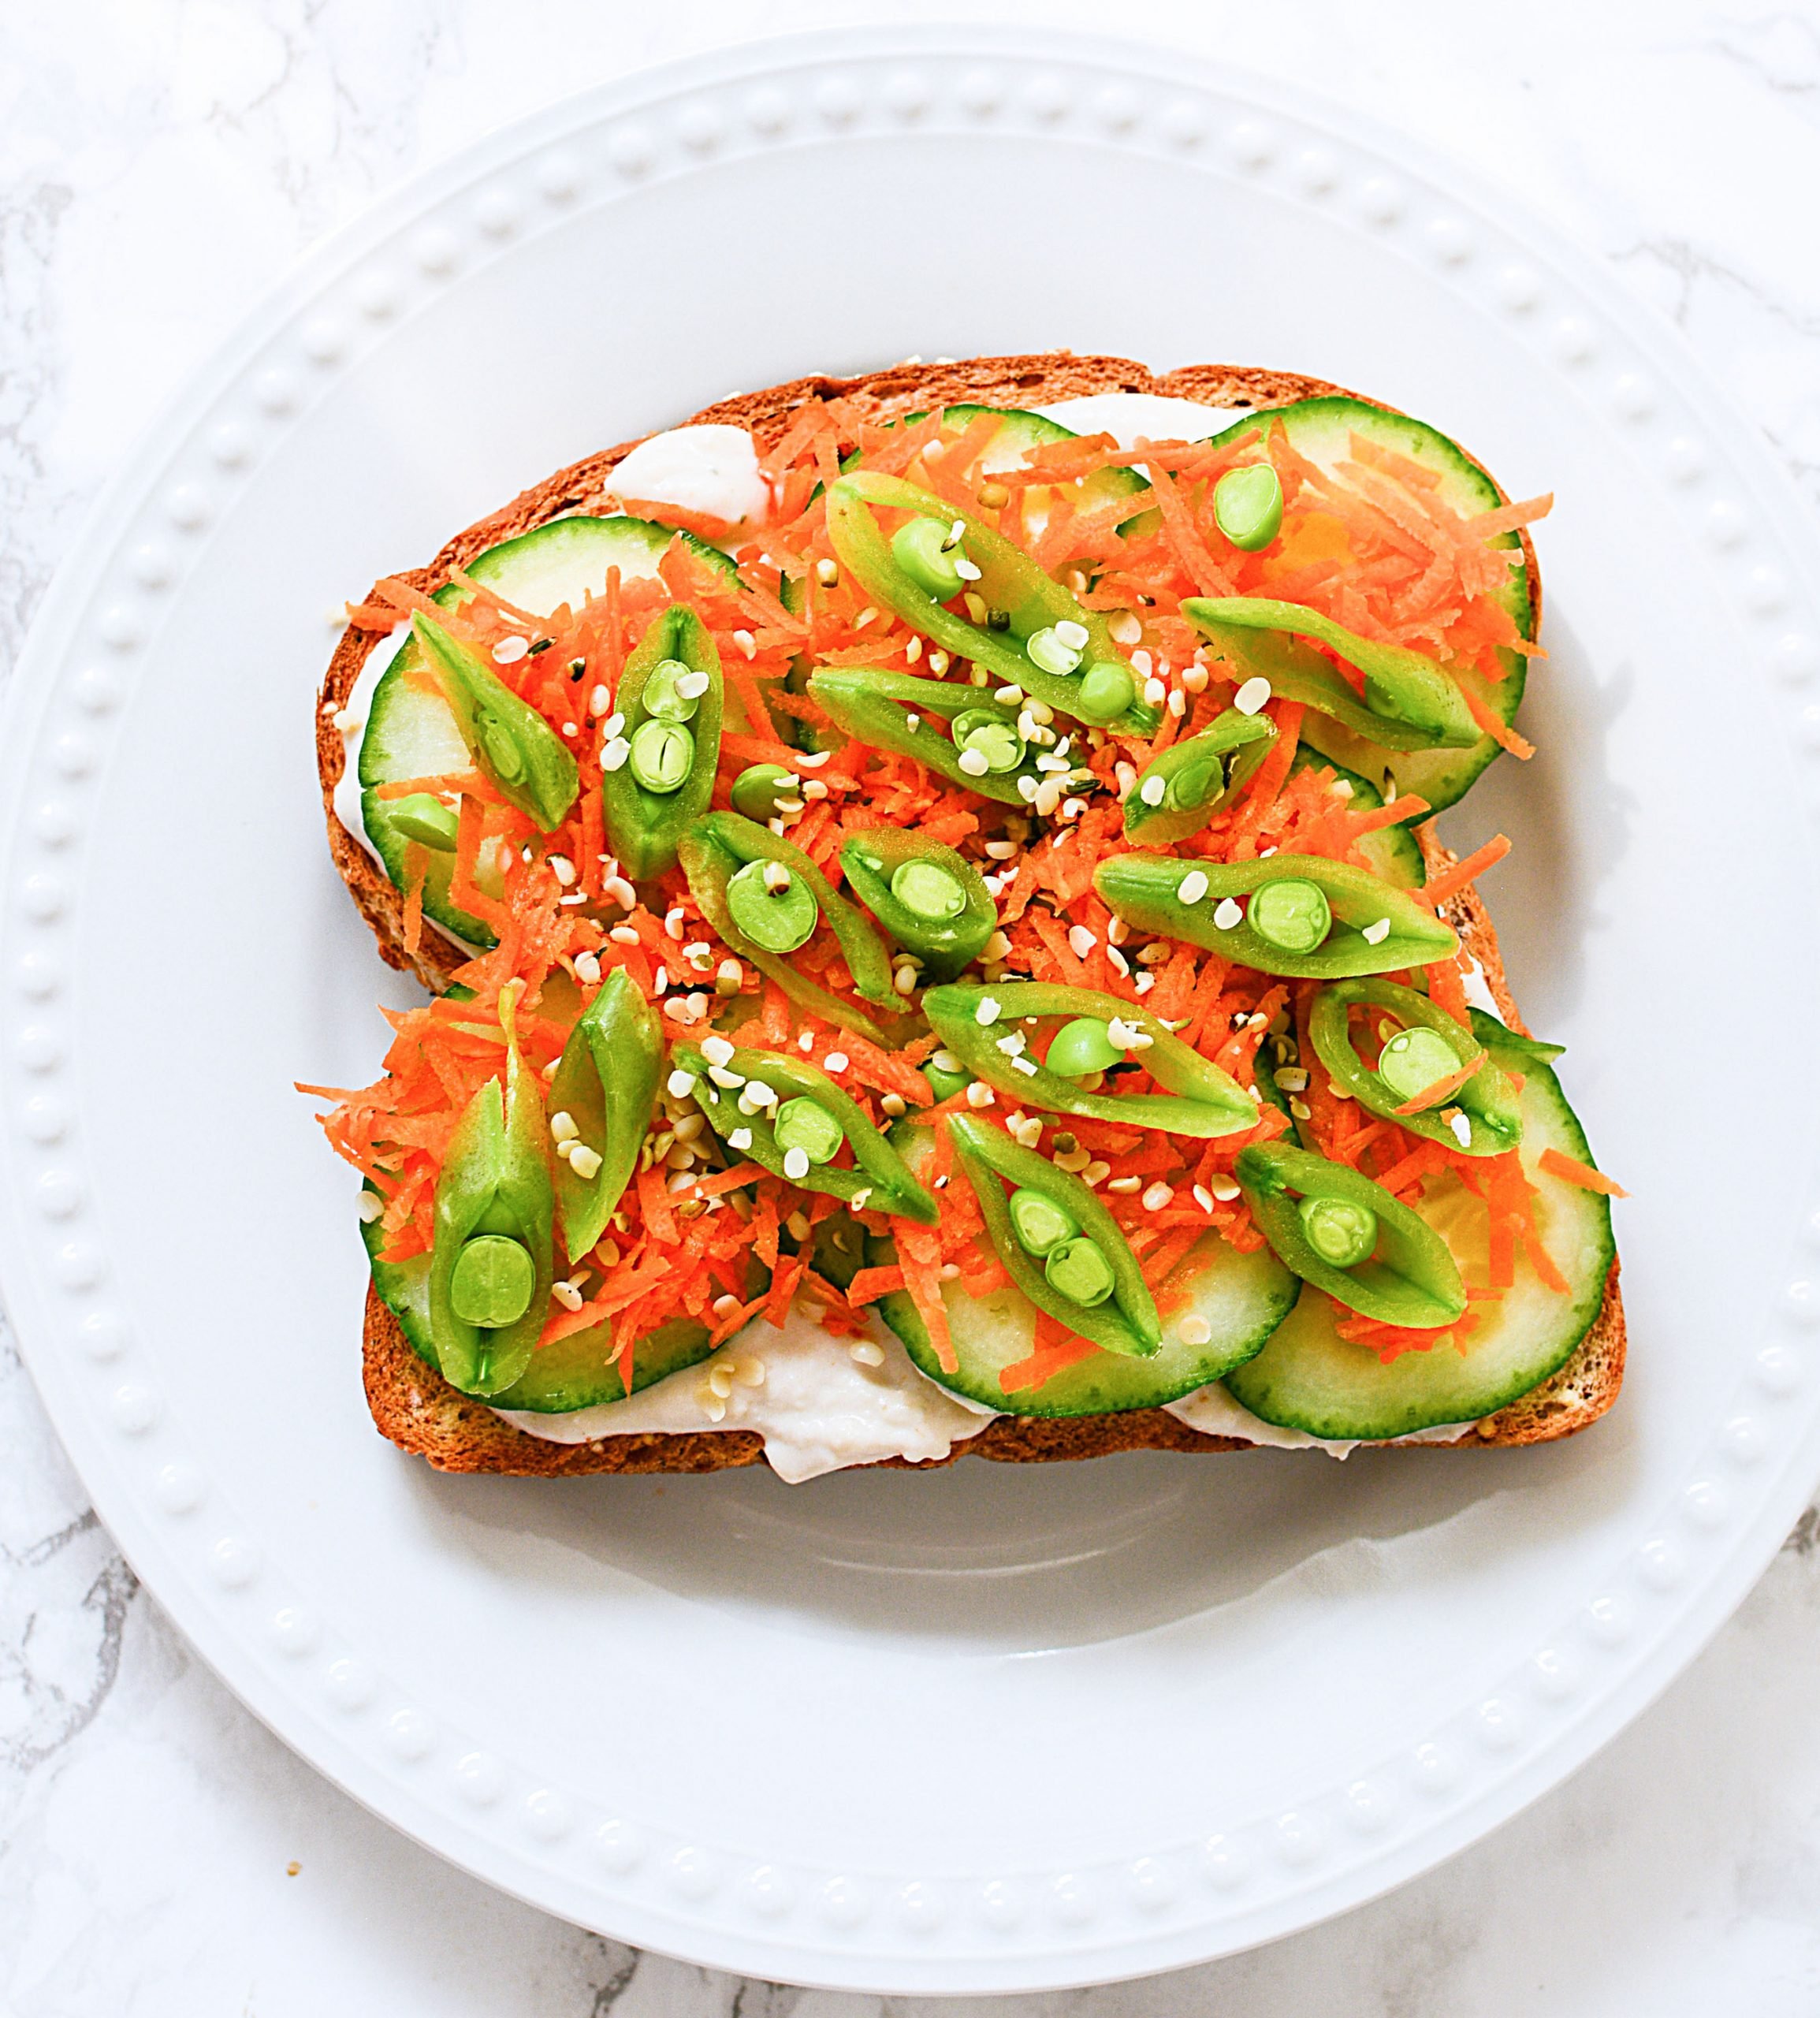 Toast with hummus, grated carrot, cucumber and sliced pea pods on top.